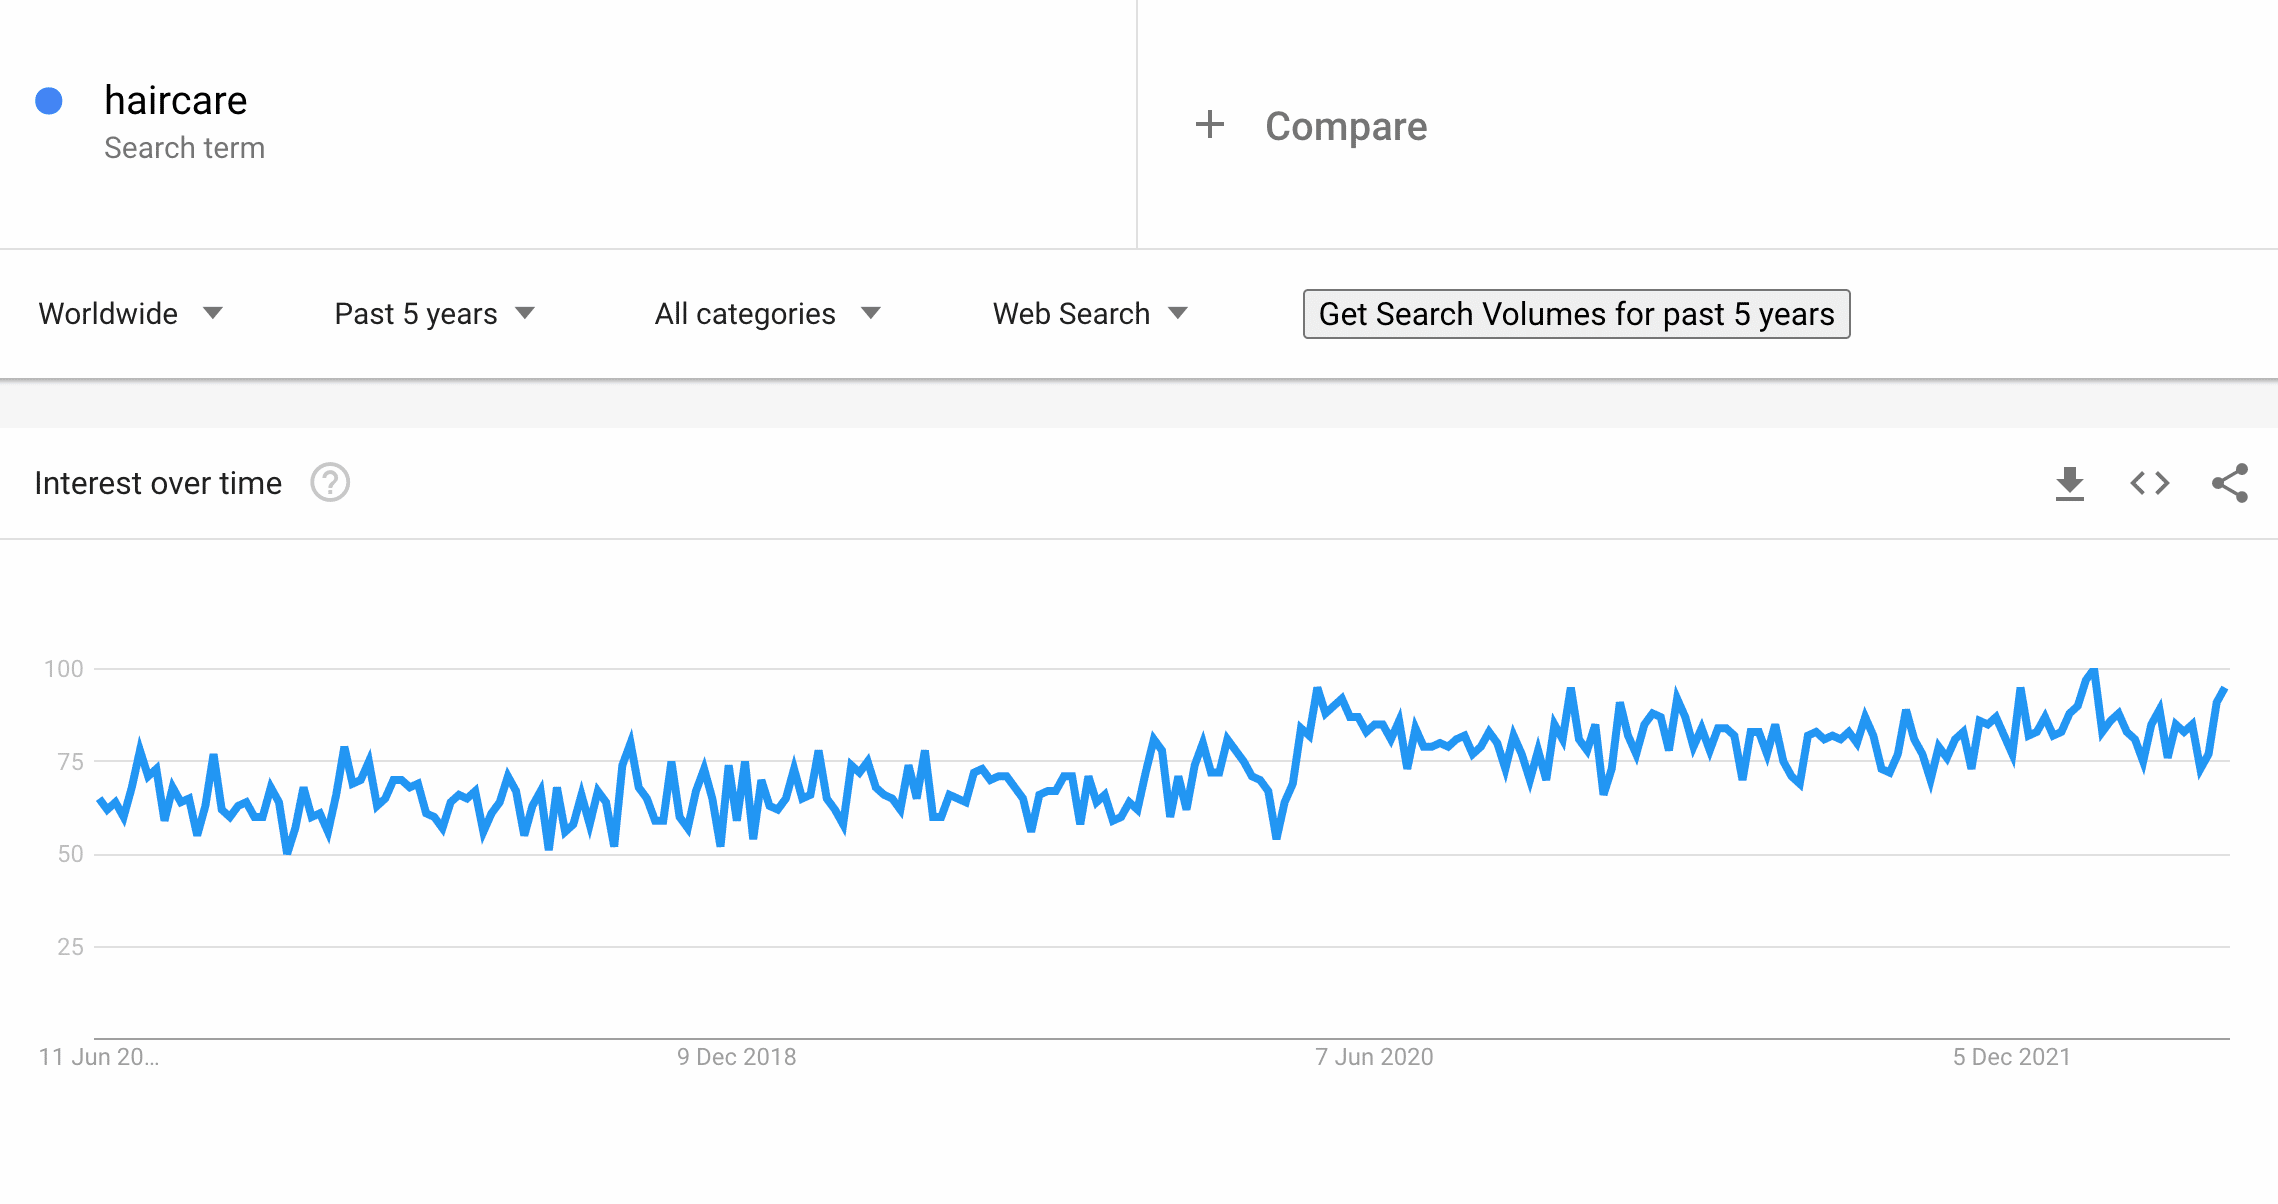 Haircare according to Google Trends